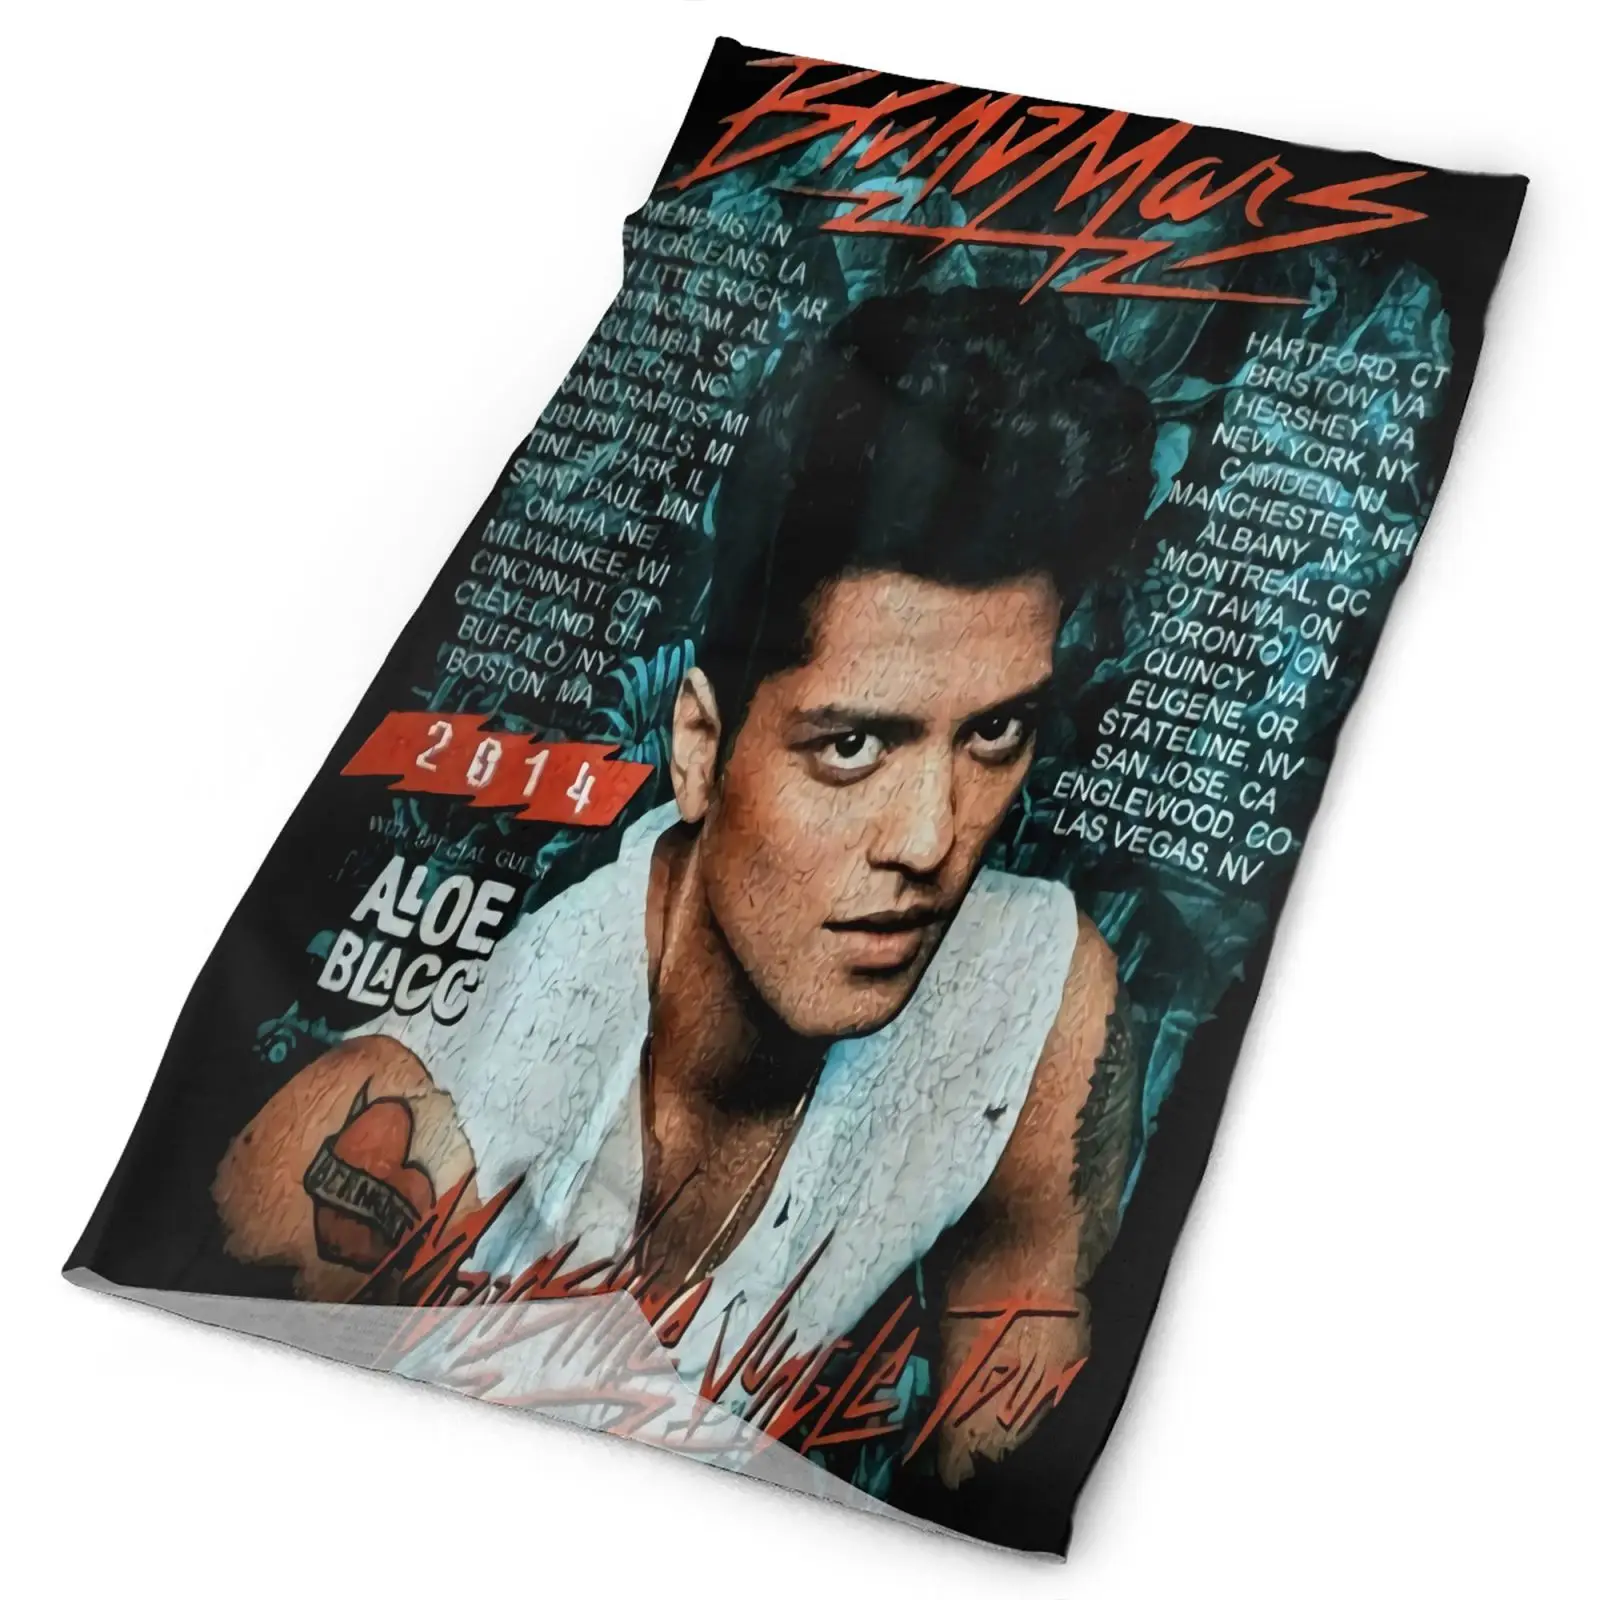 

2014 Bruno Mars Moonshine Jungle Your Men's Bandana Military Men's Neck Buff Mask Hunting Clothes And Accessories Skimask Mask